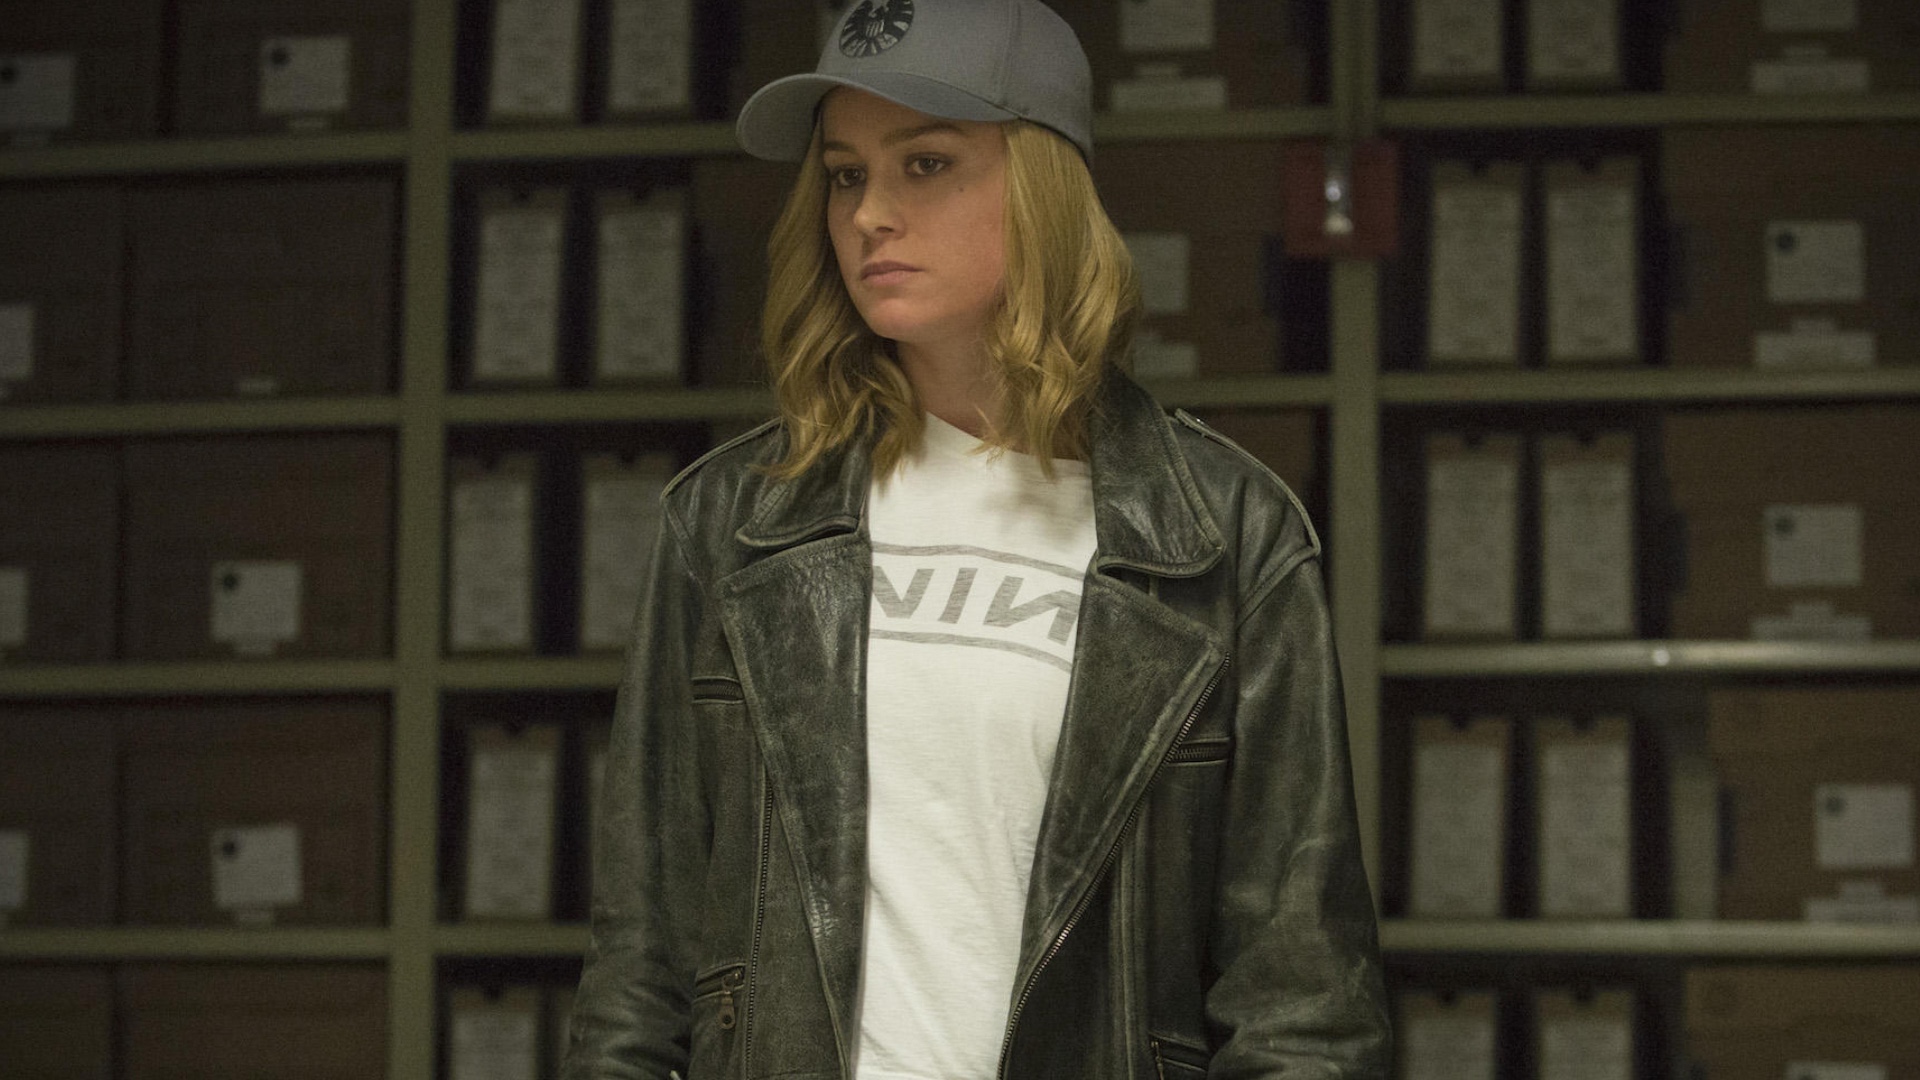 What 1980s Stereotype Are You? Captain Marvel 1995